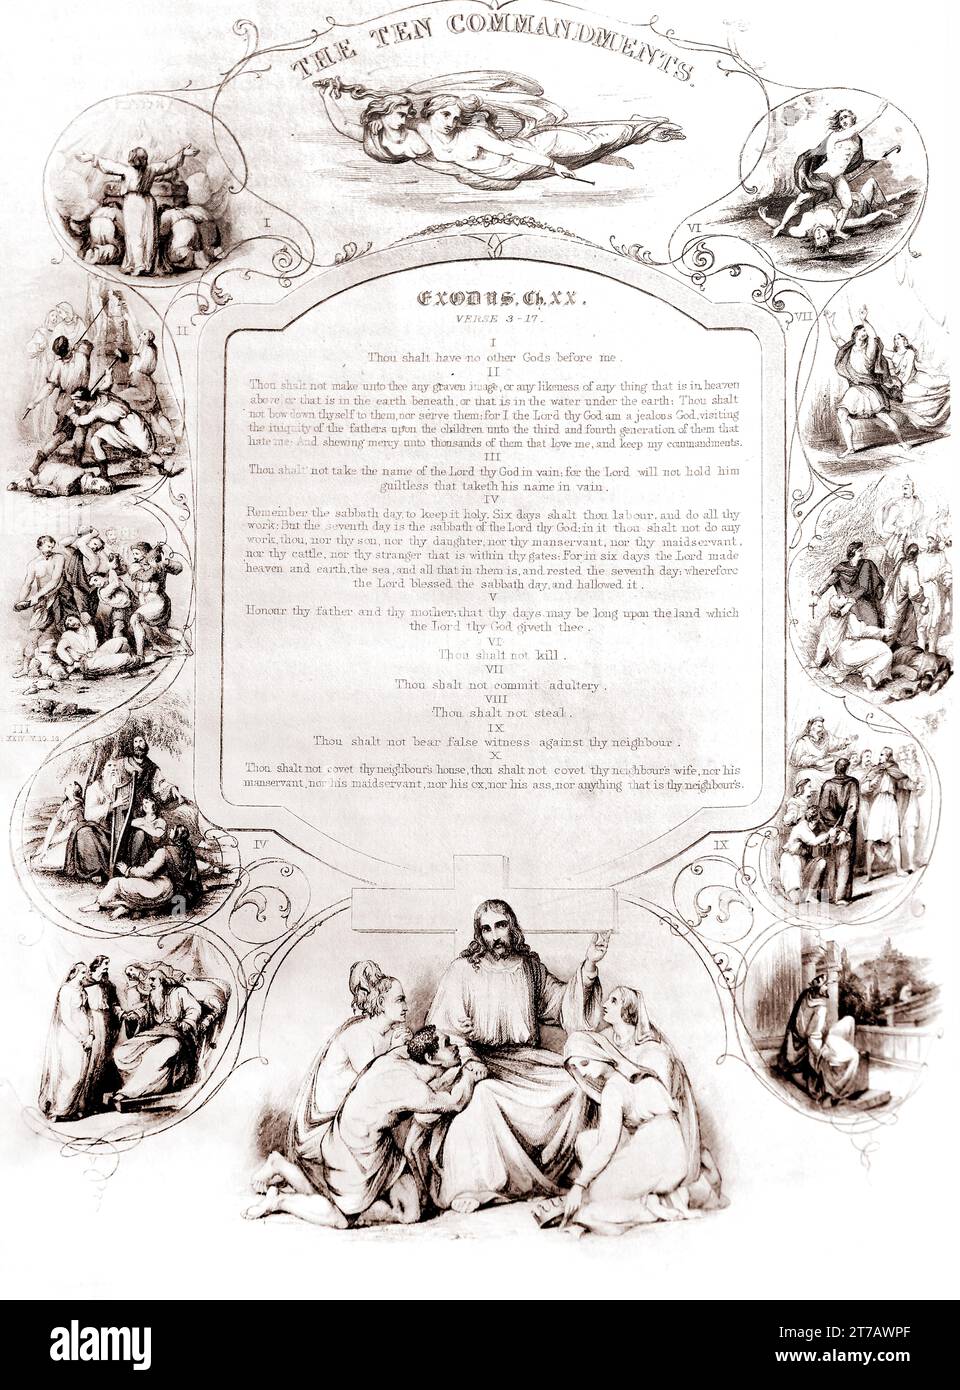 Illustration of the Ten Commandments (Exodus) From the Self-Interpreting Family Bible Stock Photo